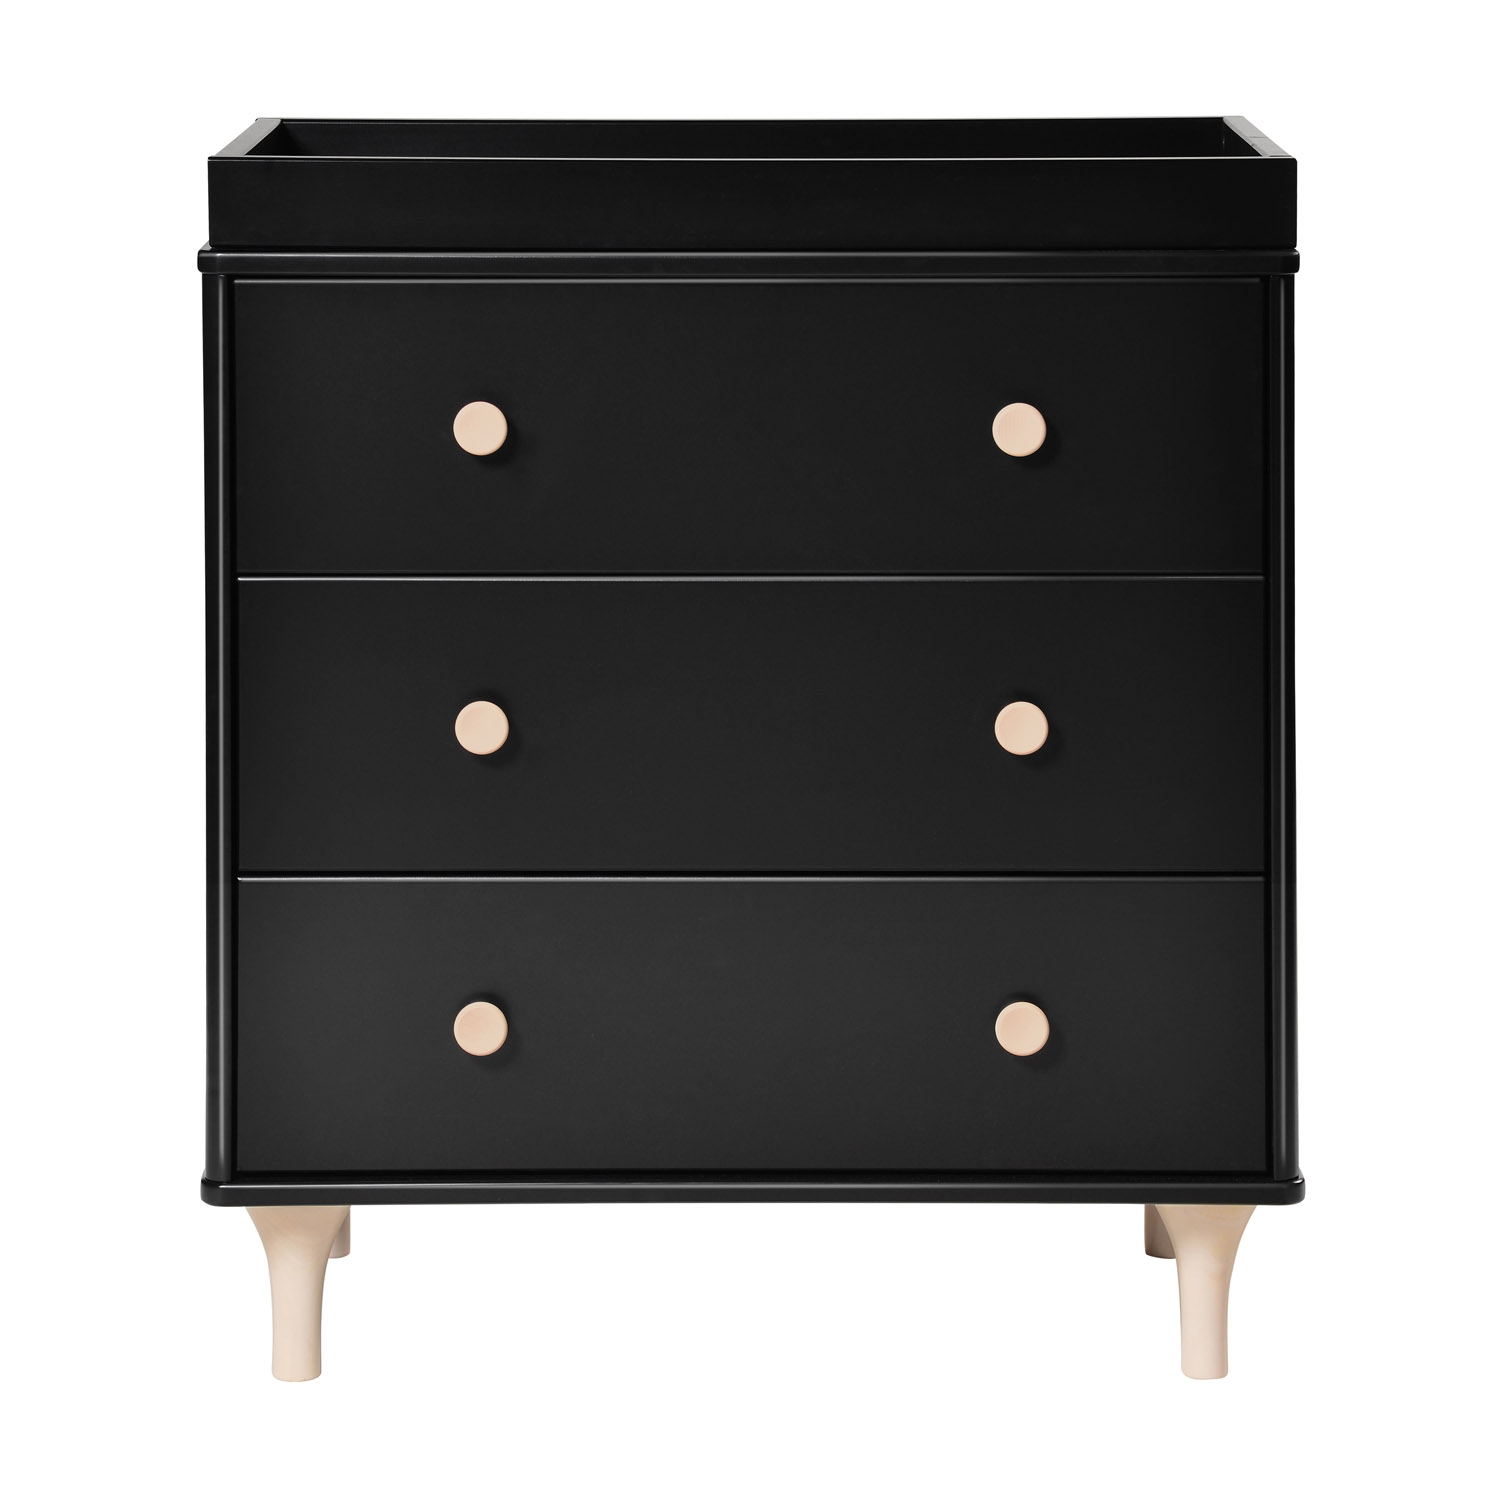 Babyletto Lolly Modern Classic Black Changing Station Dresser - Image 1